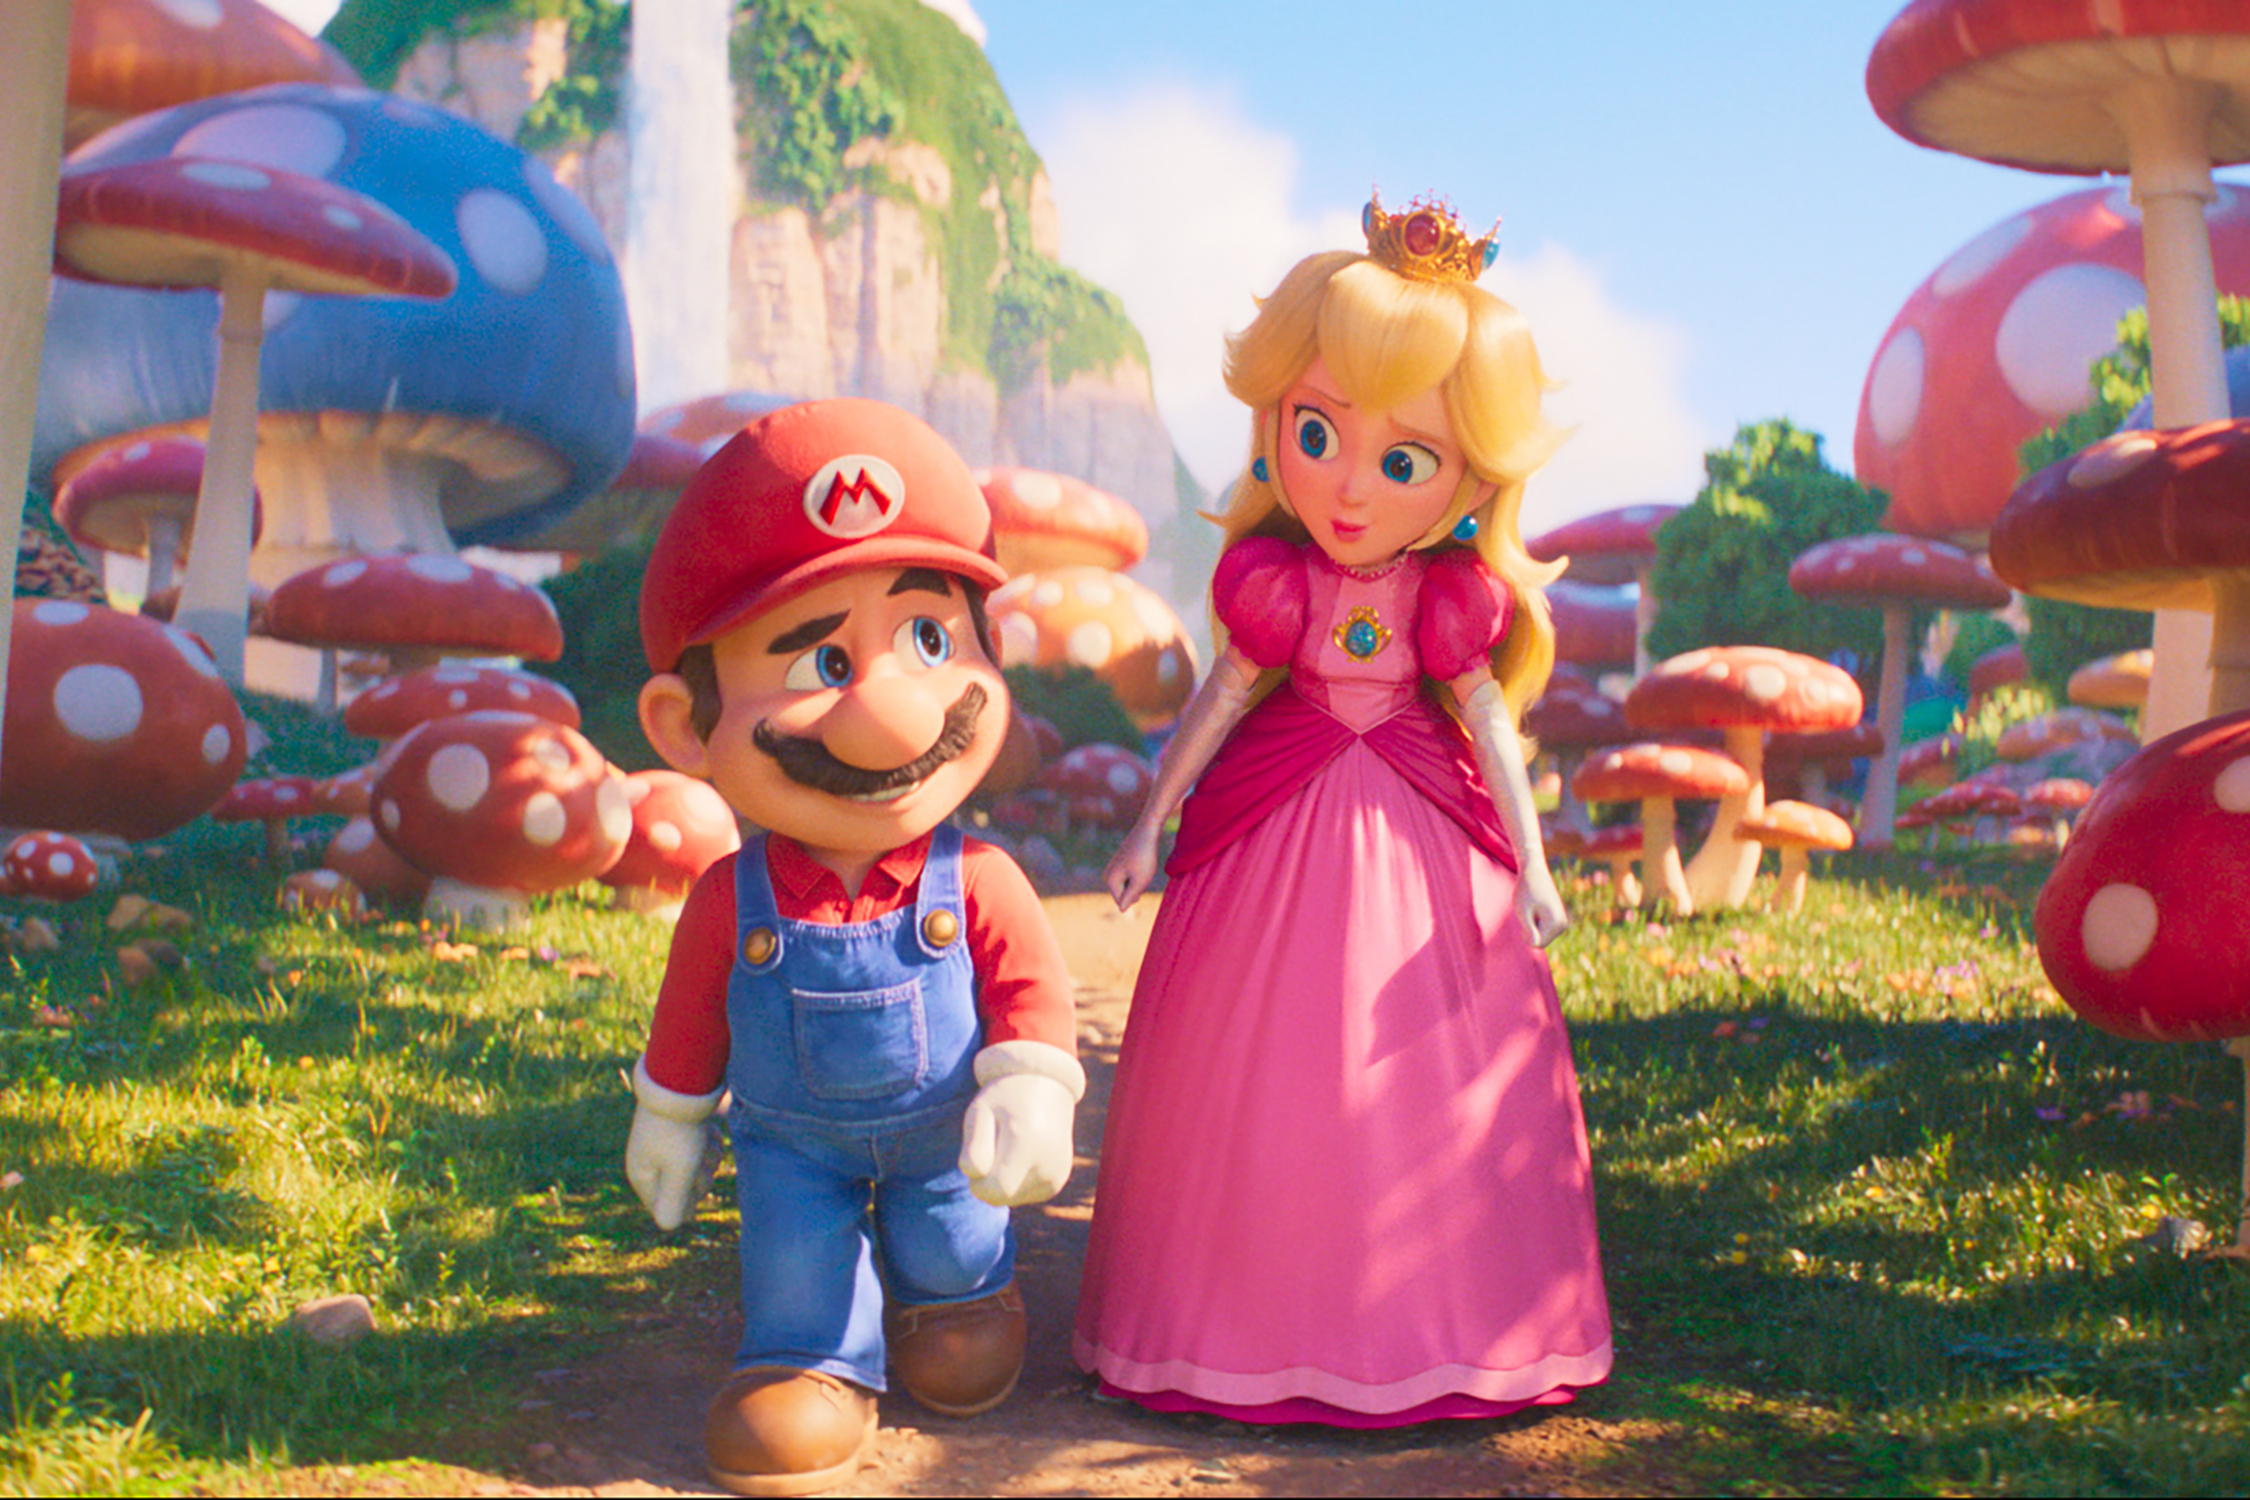 Super Mario Odyssey' is everything it needs to be and more